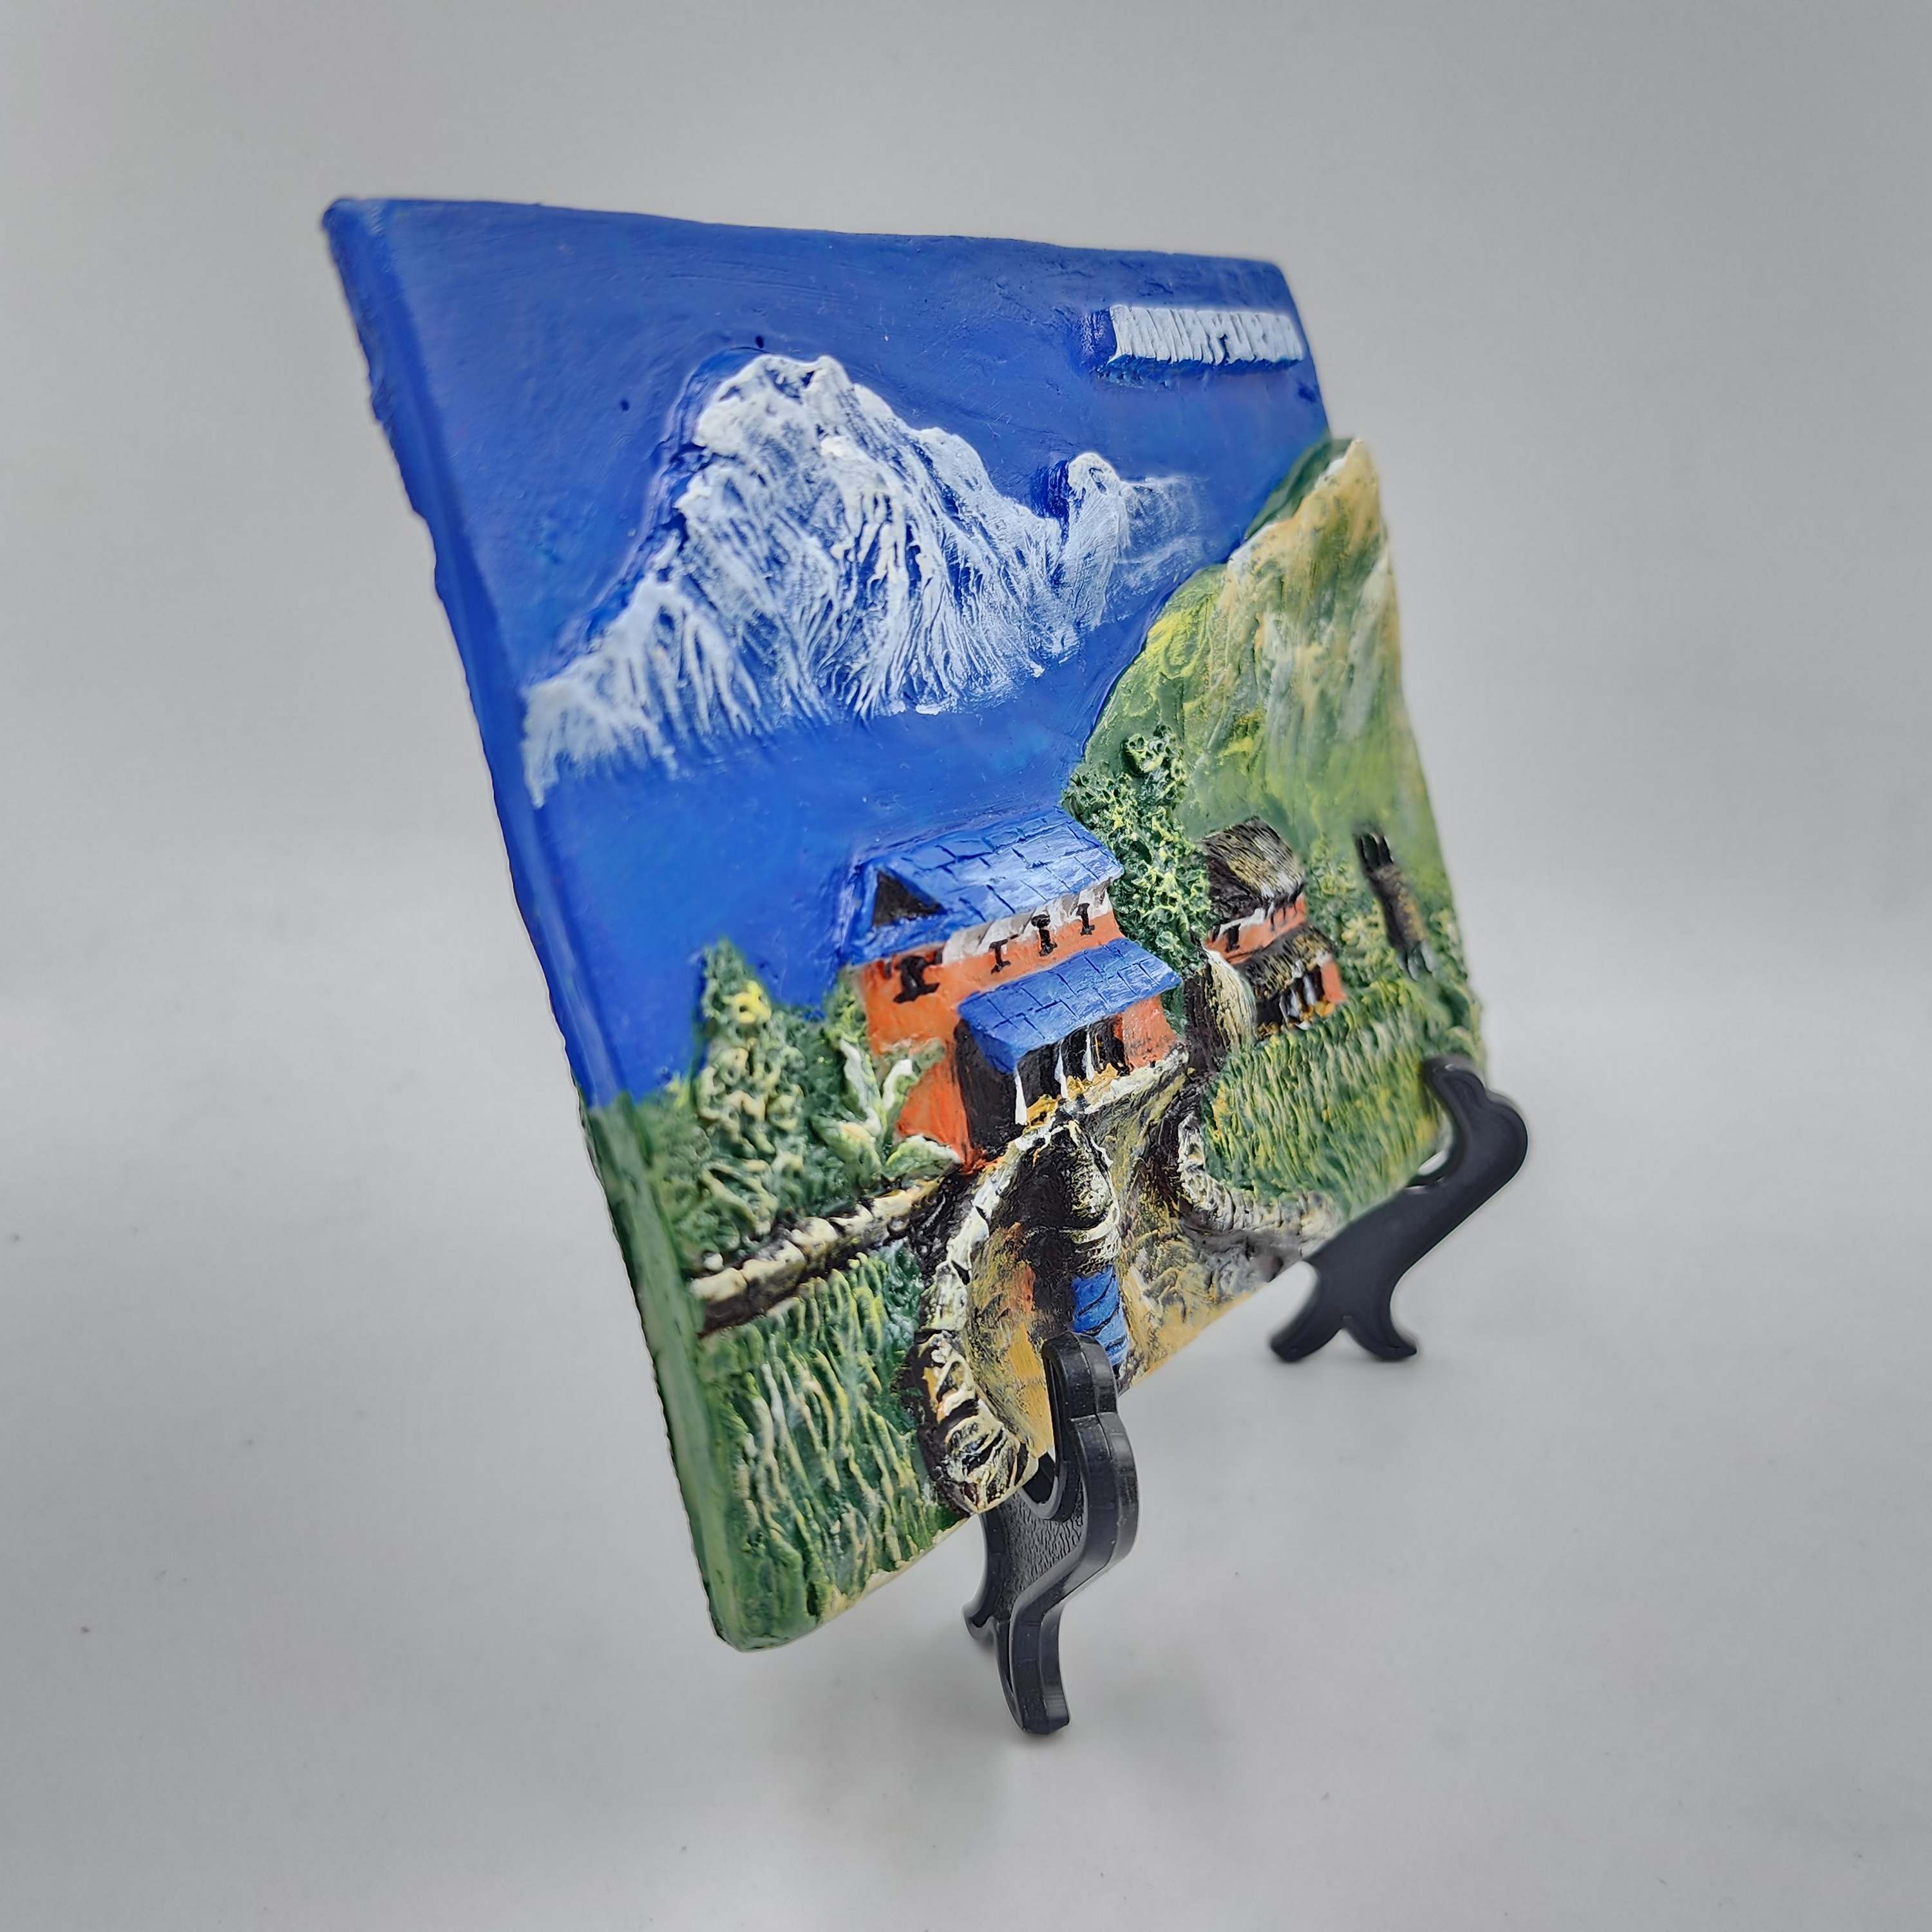 3d Fiber Art Of Annapurna Himal And Village Of Nepal With Stand And Wall Hanger